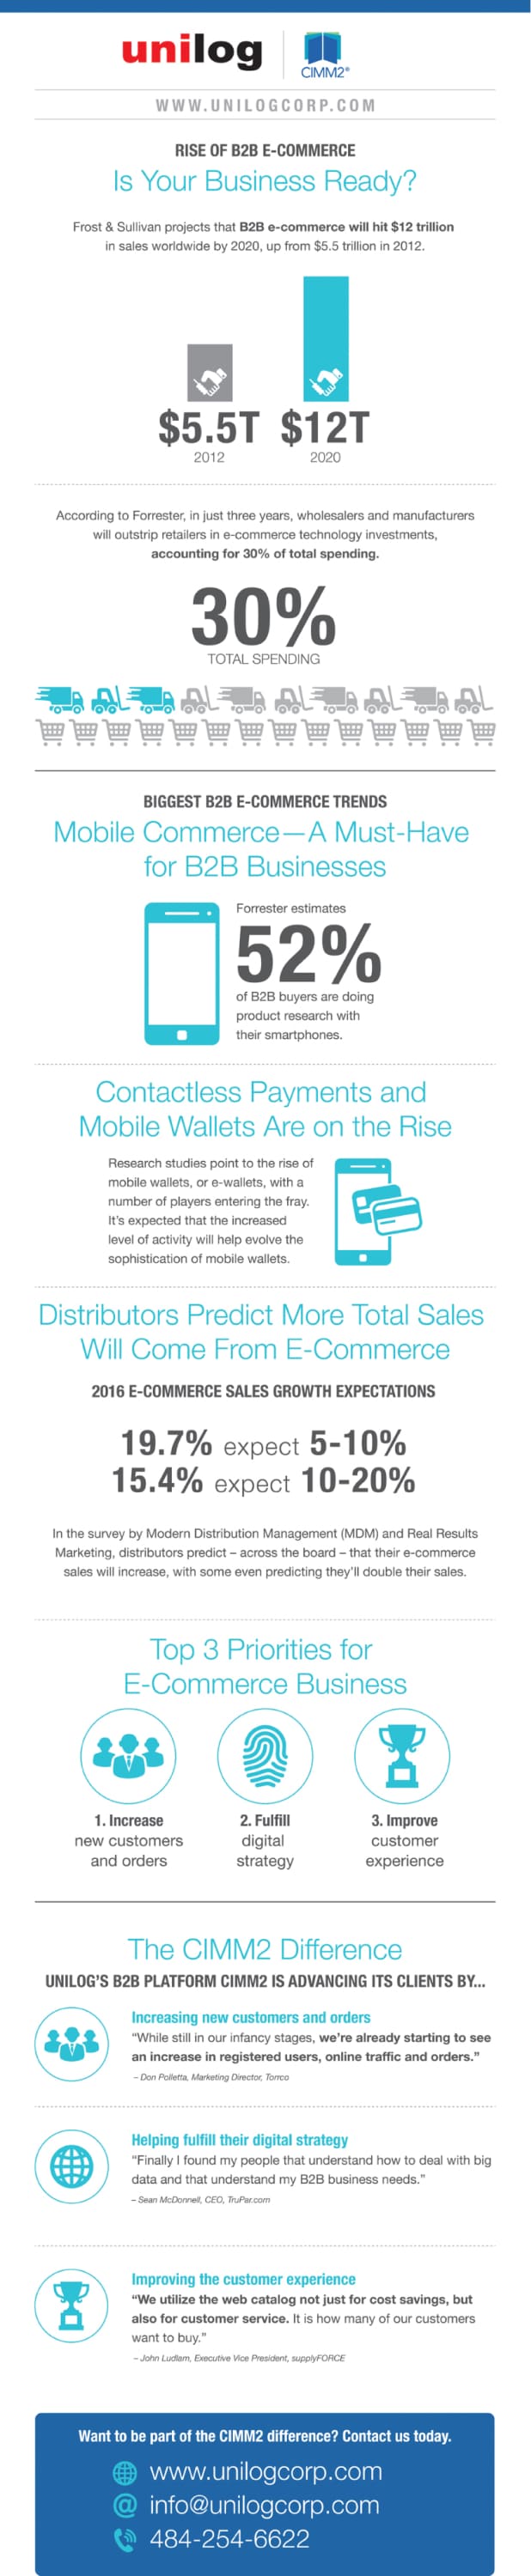 infographic for b2b ecommerce